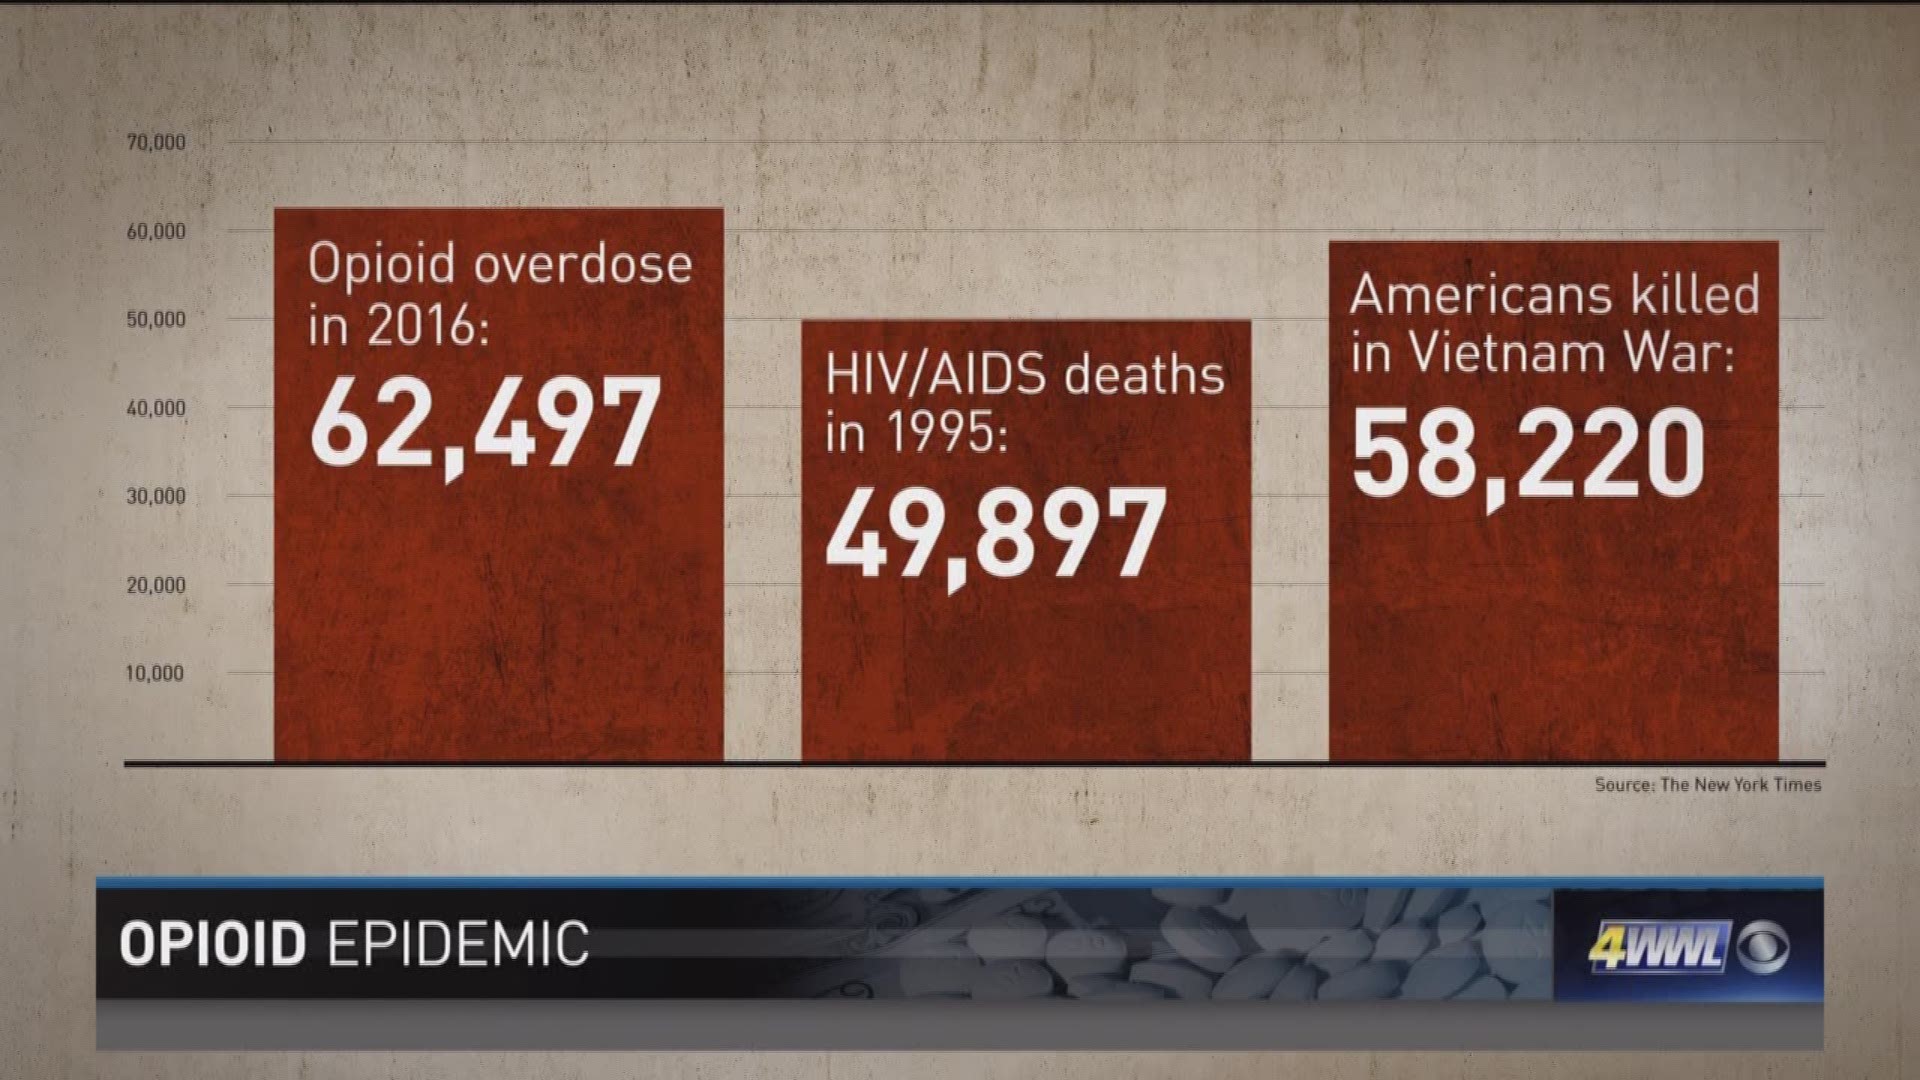 WWLTV Special: The Opioid Epidemic Pt. 5